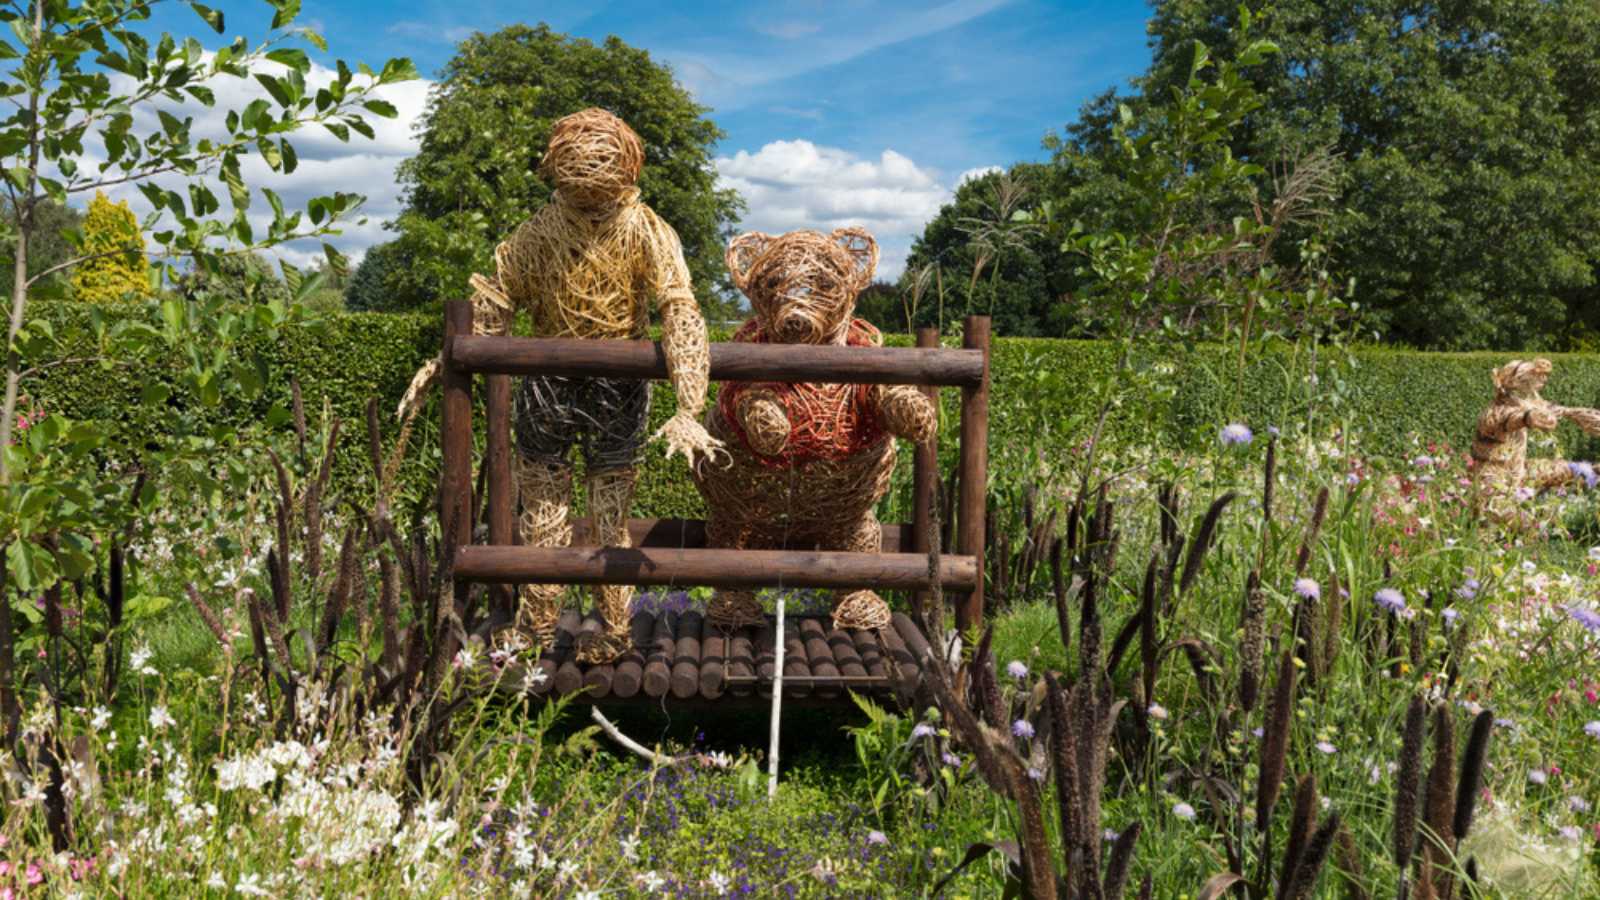 A Winnie the Pooh themed garden display in Homestead Park, York, North Yorkshire, UK - 4th August 2018